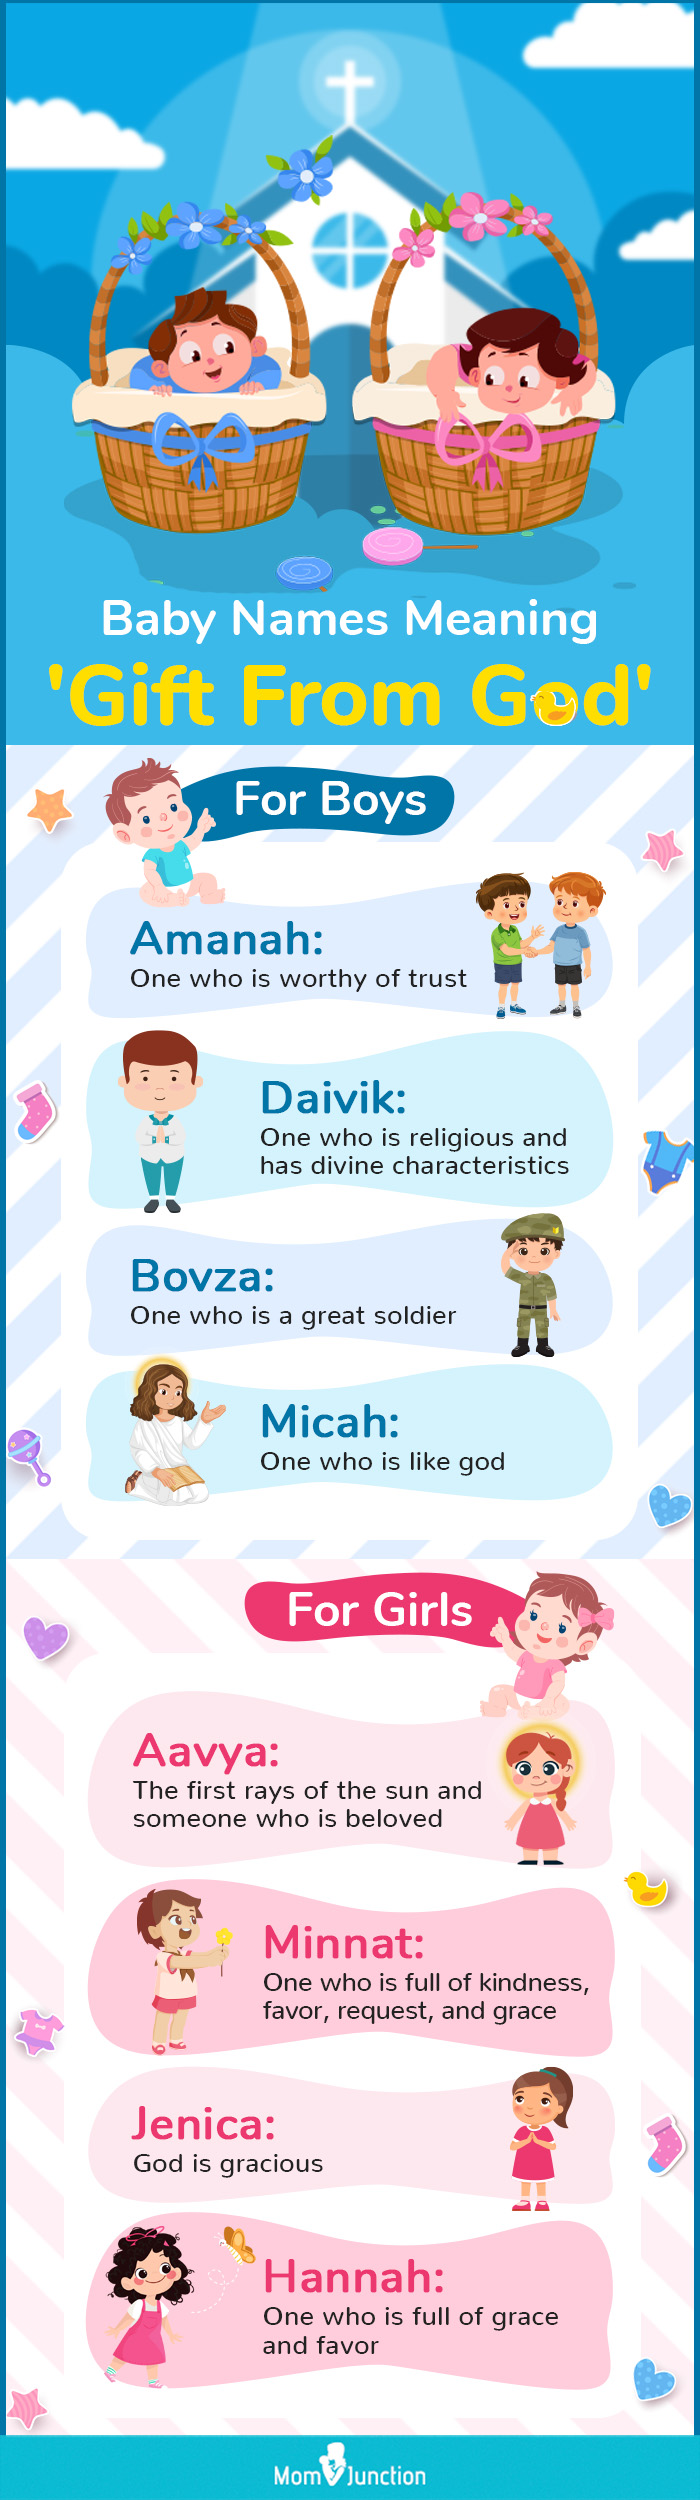 100 Royal Baby Boy Names for Your Precious Little Prince | LoveToKnow